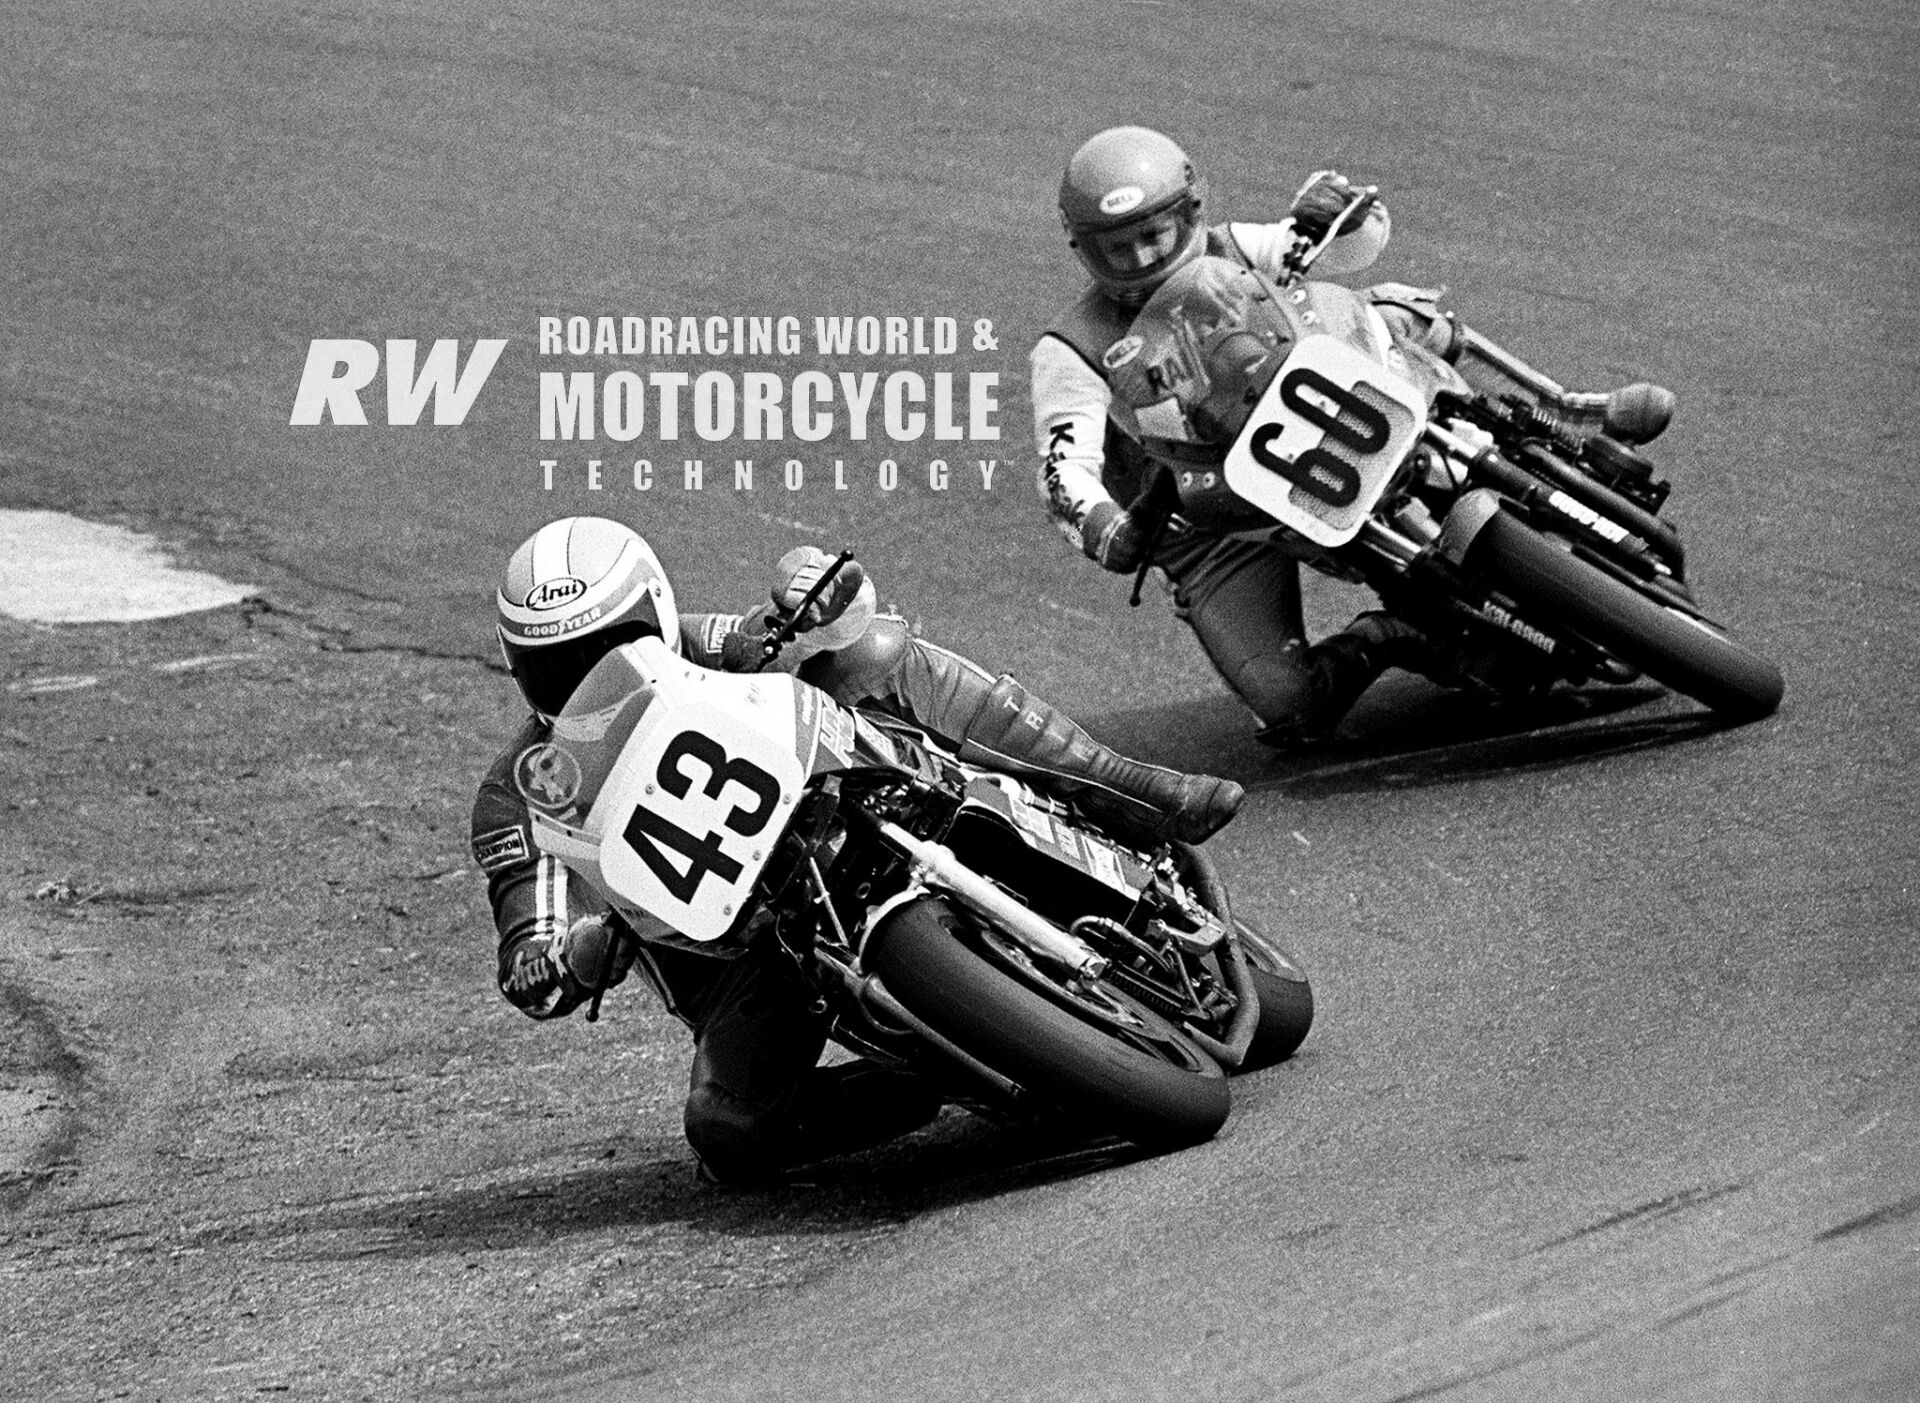 Mike Baldwin (43) on a Honda V-4, four-valves-per-cylinder, liquid-cooled VF750F Interceptor leads Wayne Rainey (60) on an Inline-4, two-valves-per-cylinder, air-cooled Kawasaki GPz750 in the 1983 AMA Superbike race at Loudon, New Hampshire. Photo by John Owens.